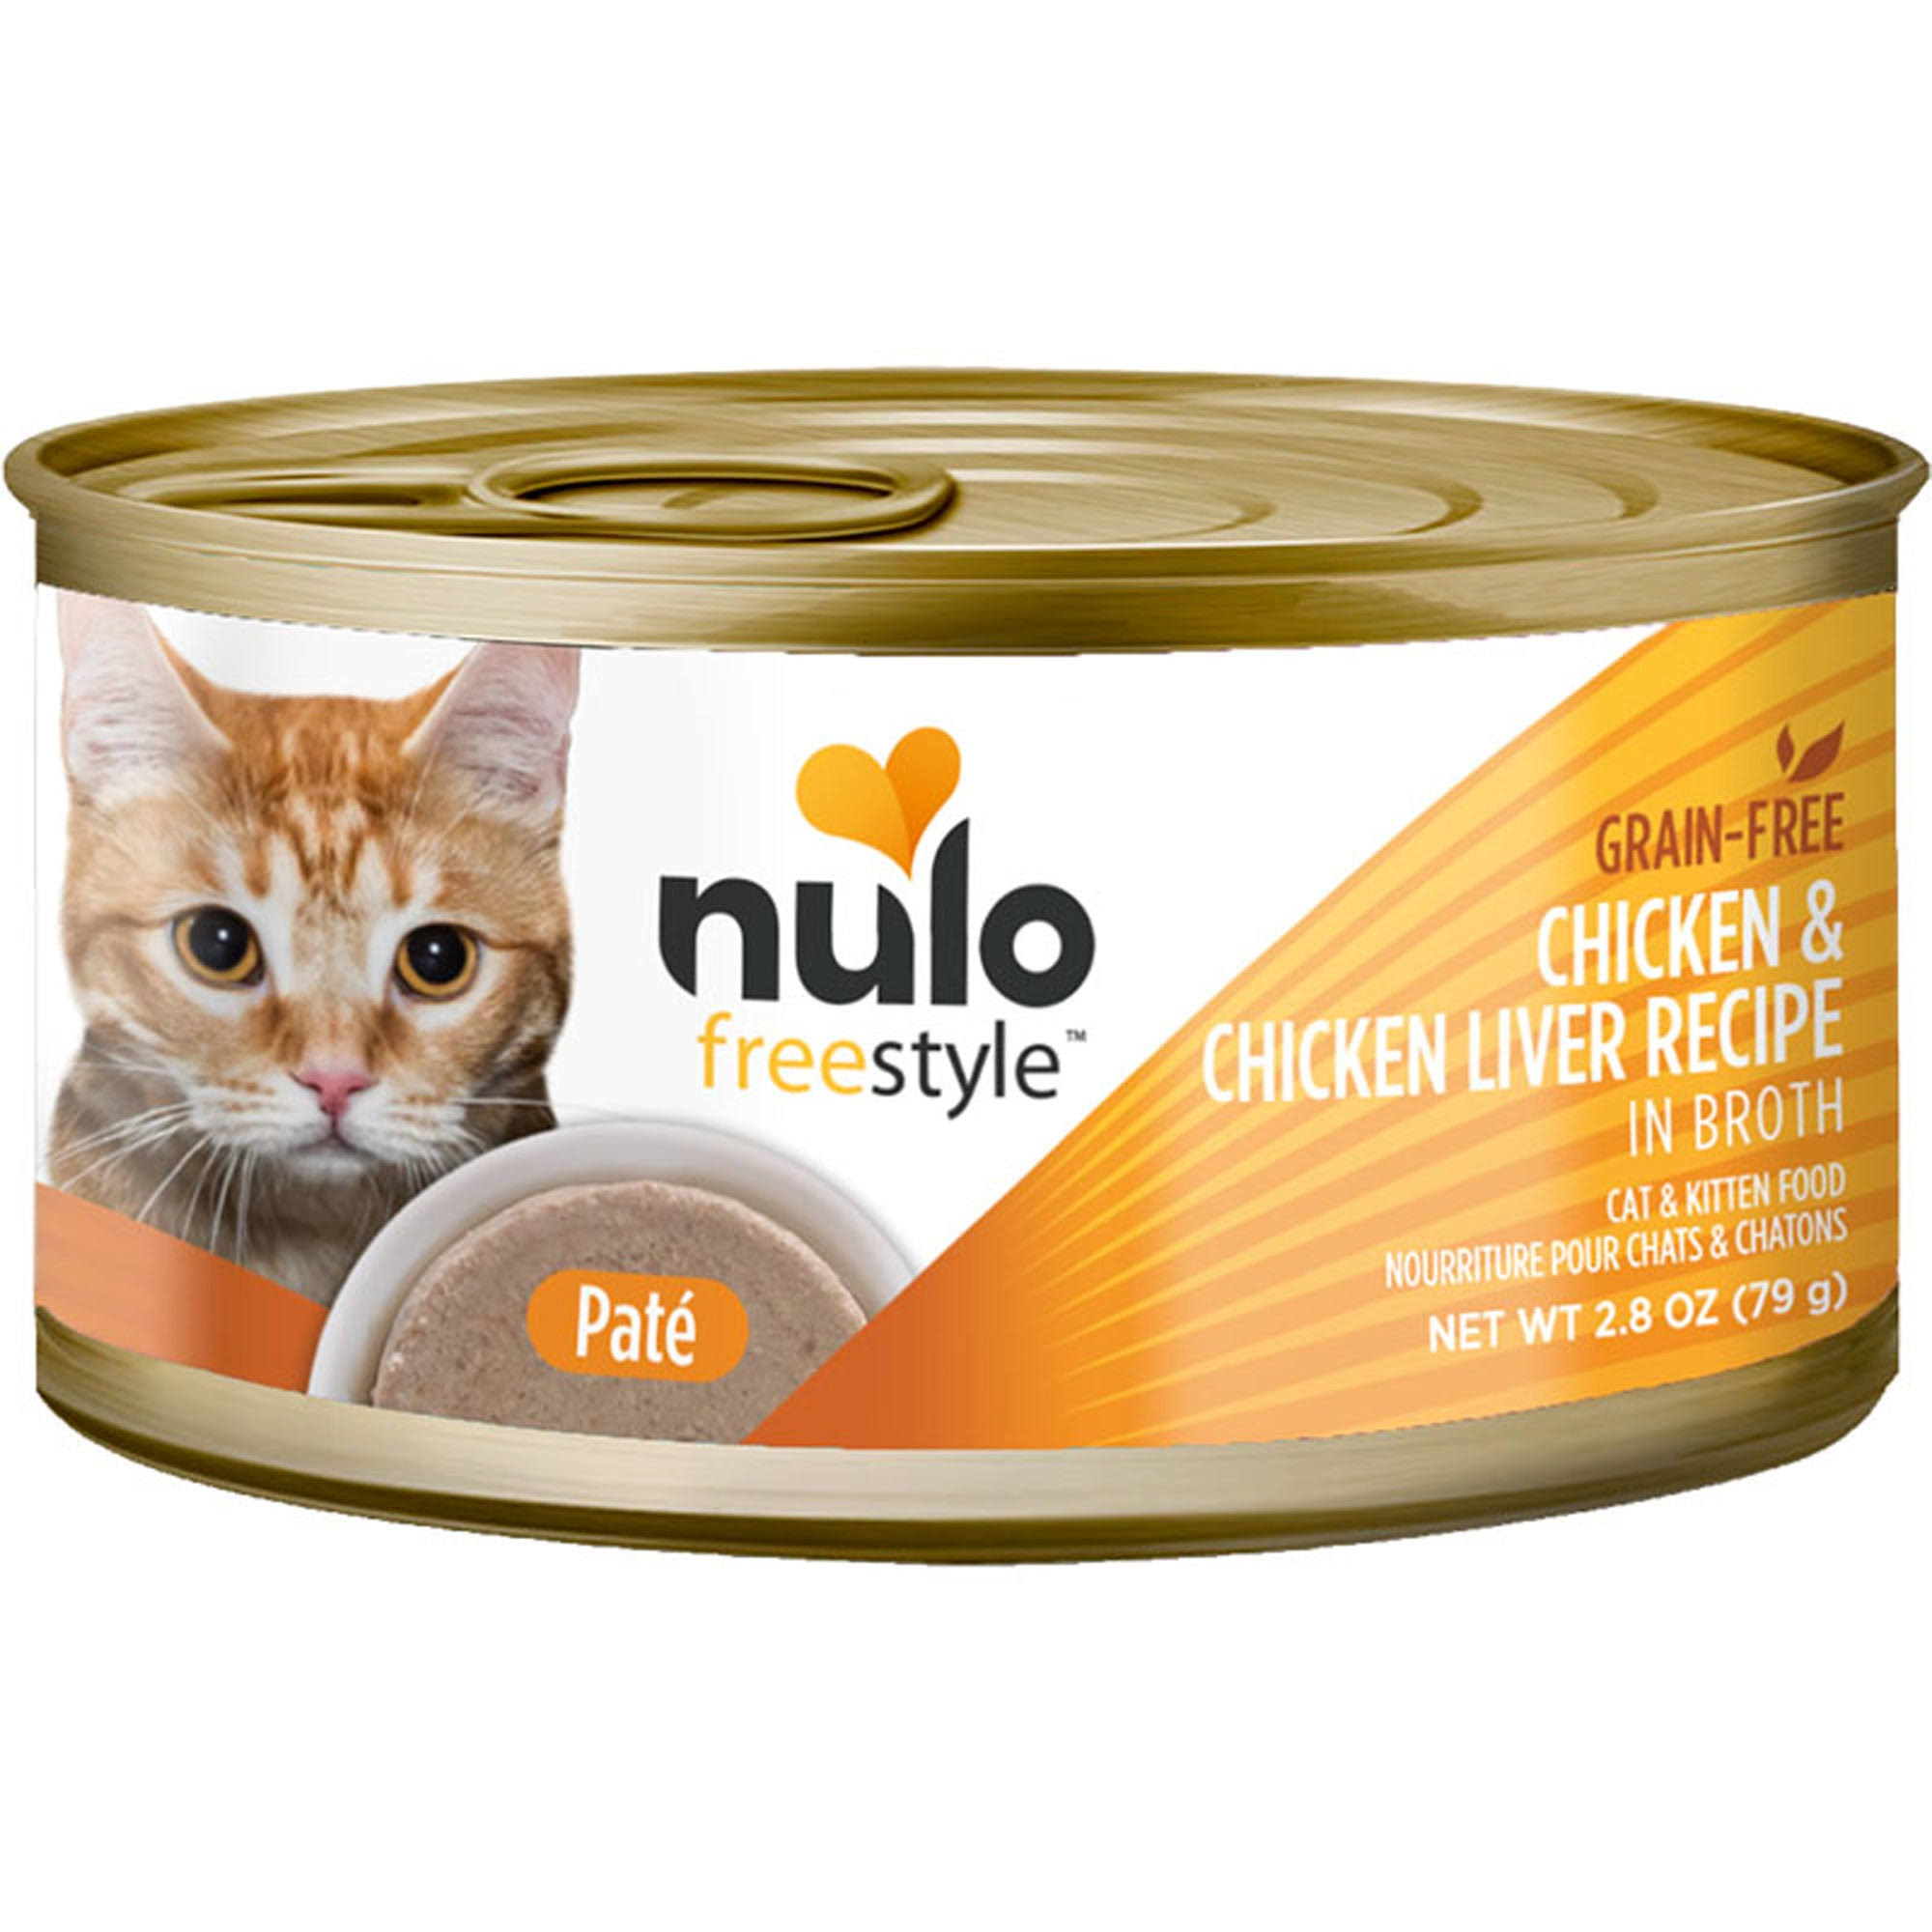 Nulo Freestyle Smooth Pate Grain-Free Wet Cat Food 2.8 oz - 12ea / Chicken & Chicken Liver